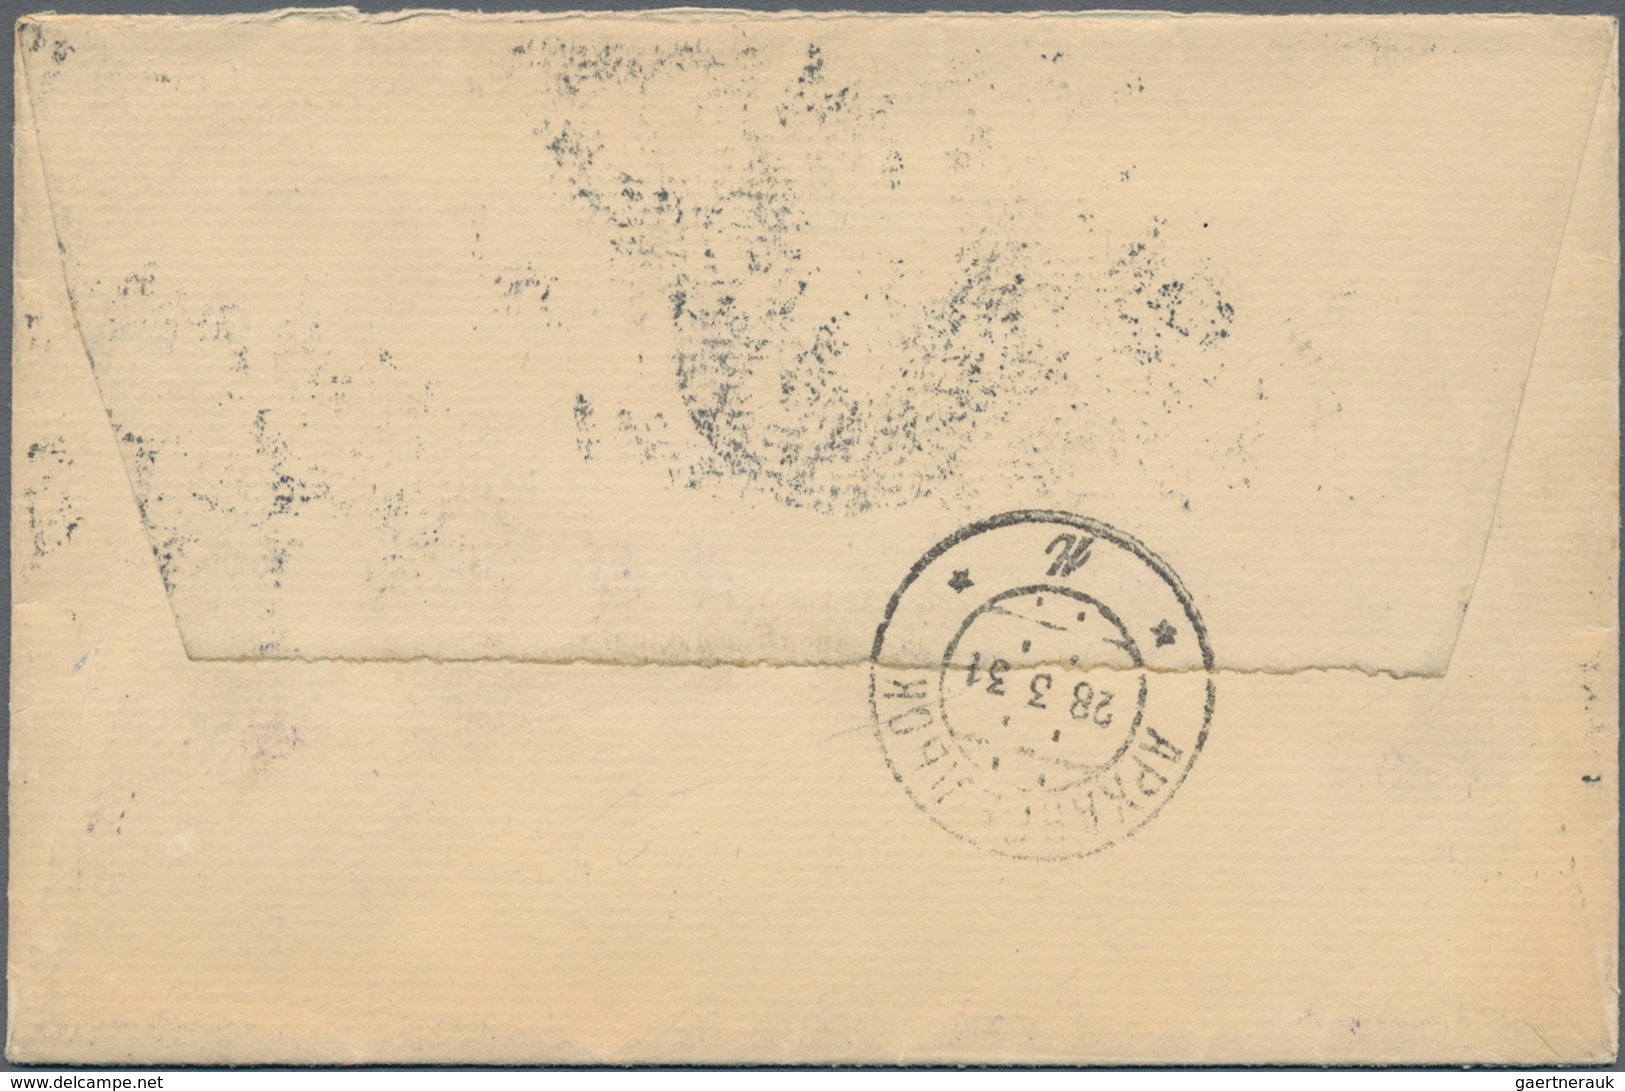 Mongolei: 1926/29, 20 Mung And 50 Mung Tied "ULANTOMIN... 12 3 31" To Registered Cover To USSR With - Mongolia